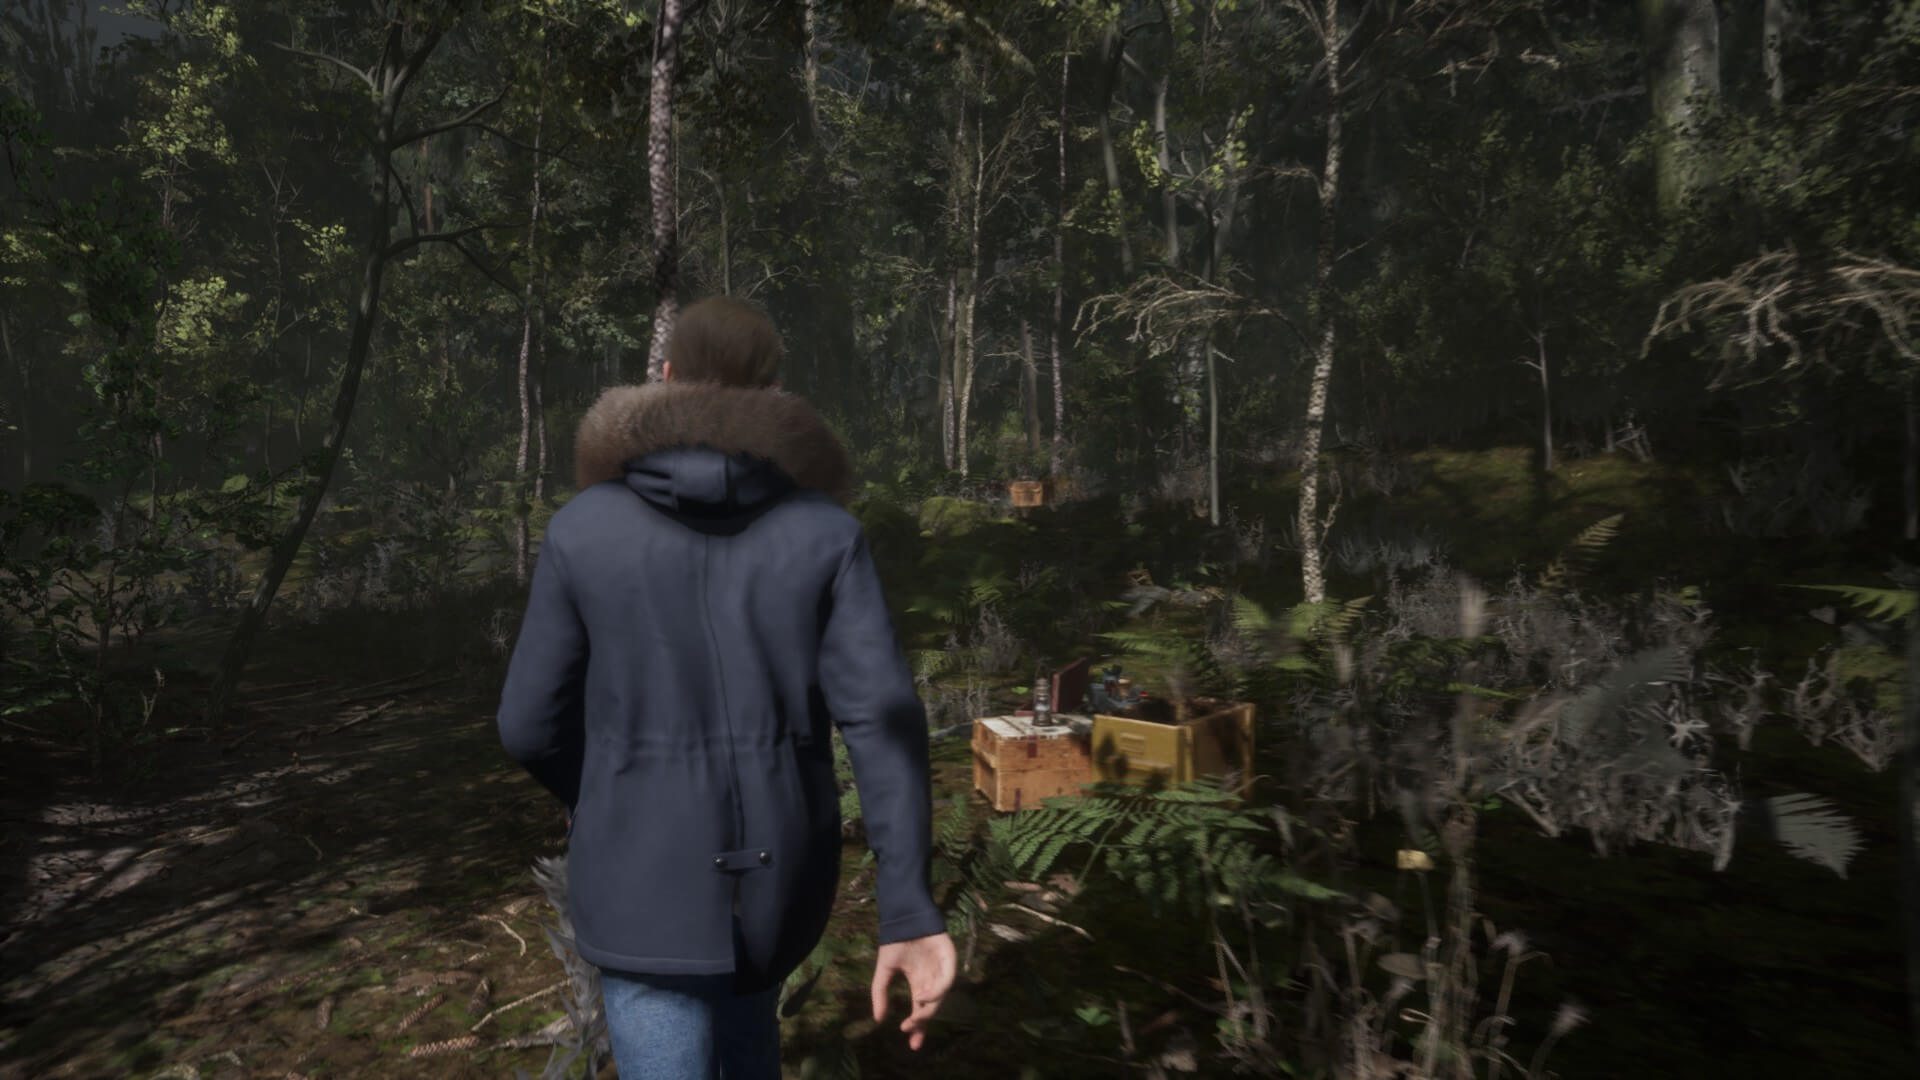 Daniel is walking around a forest. There are two crates of ammo in the shot which the player can use to restock their pistol.